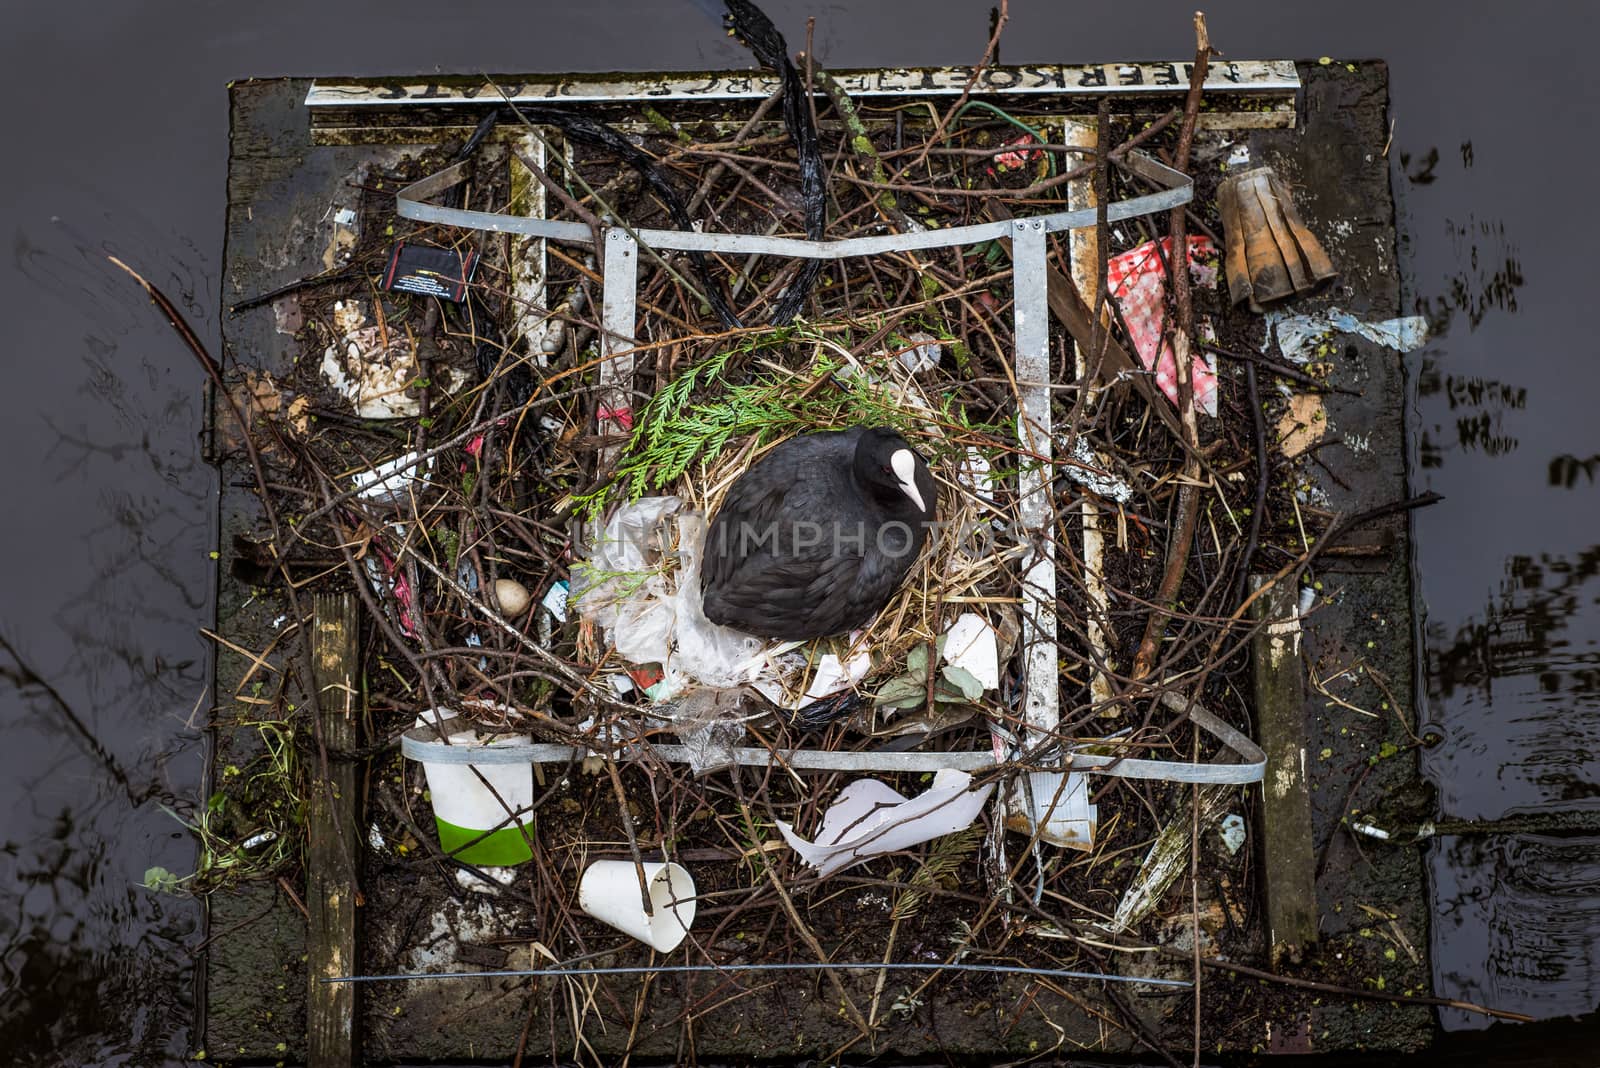 Eurasian Coot sitting on a nest built with human trash and litter, viewed from above. Dutch sign at the top reads, "MEERKOETJE BROEDPLAATS," meaning "Coot nesting place"